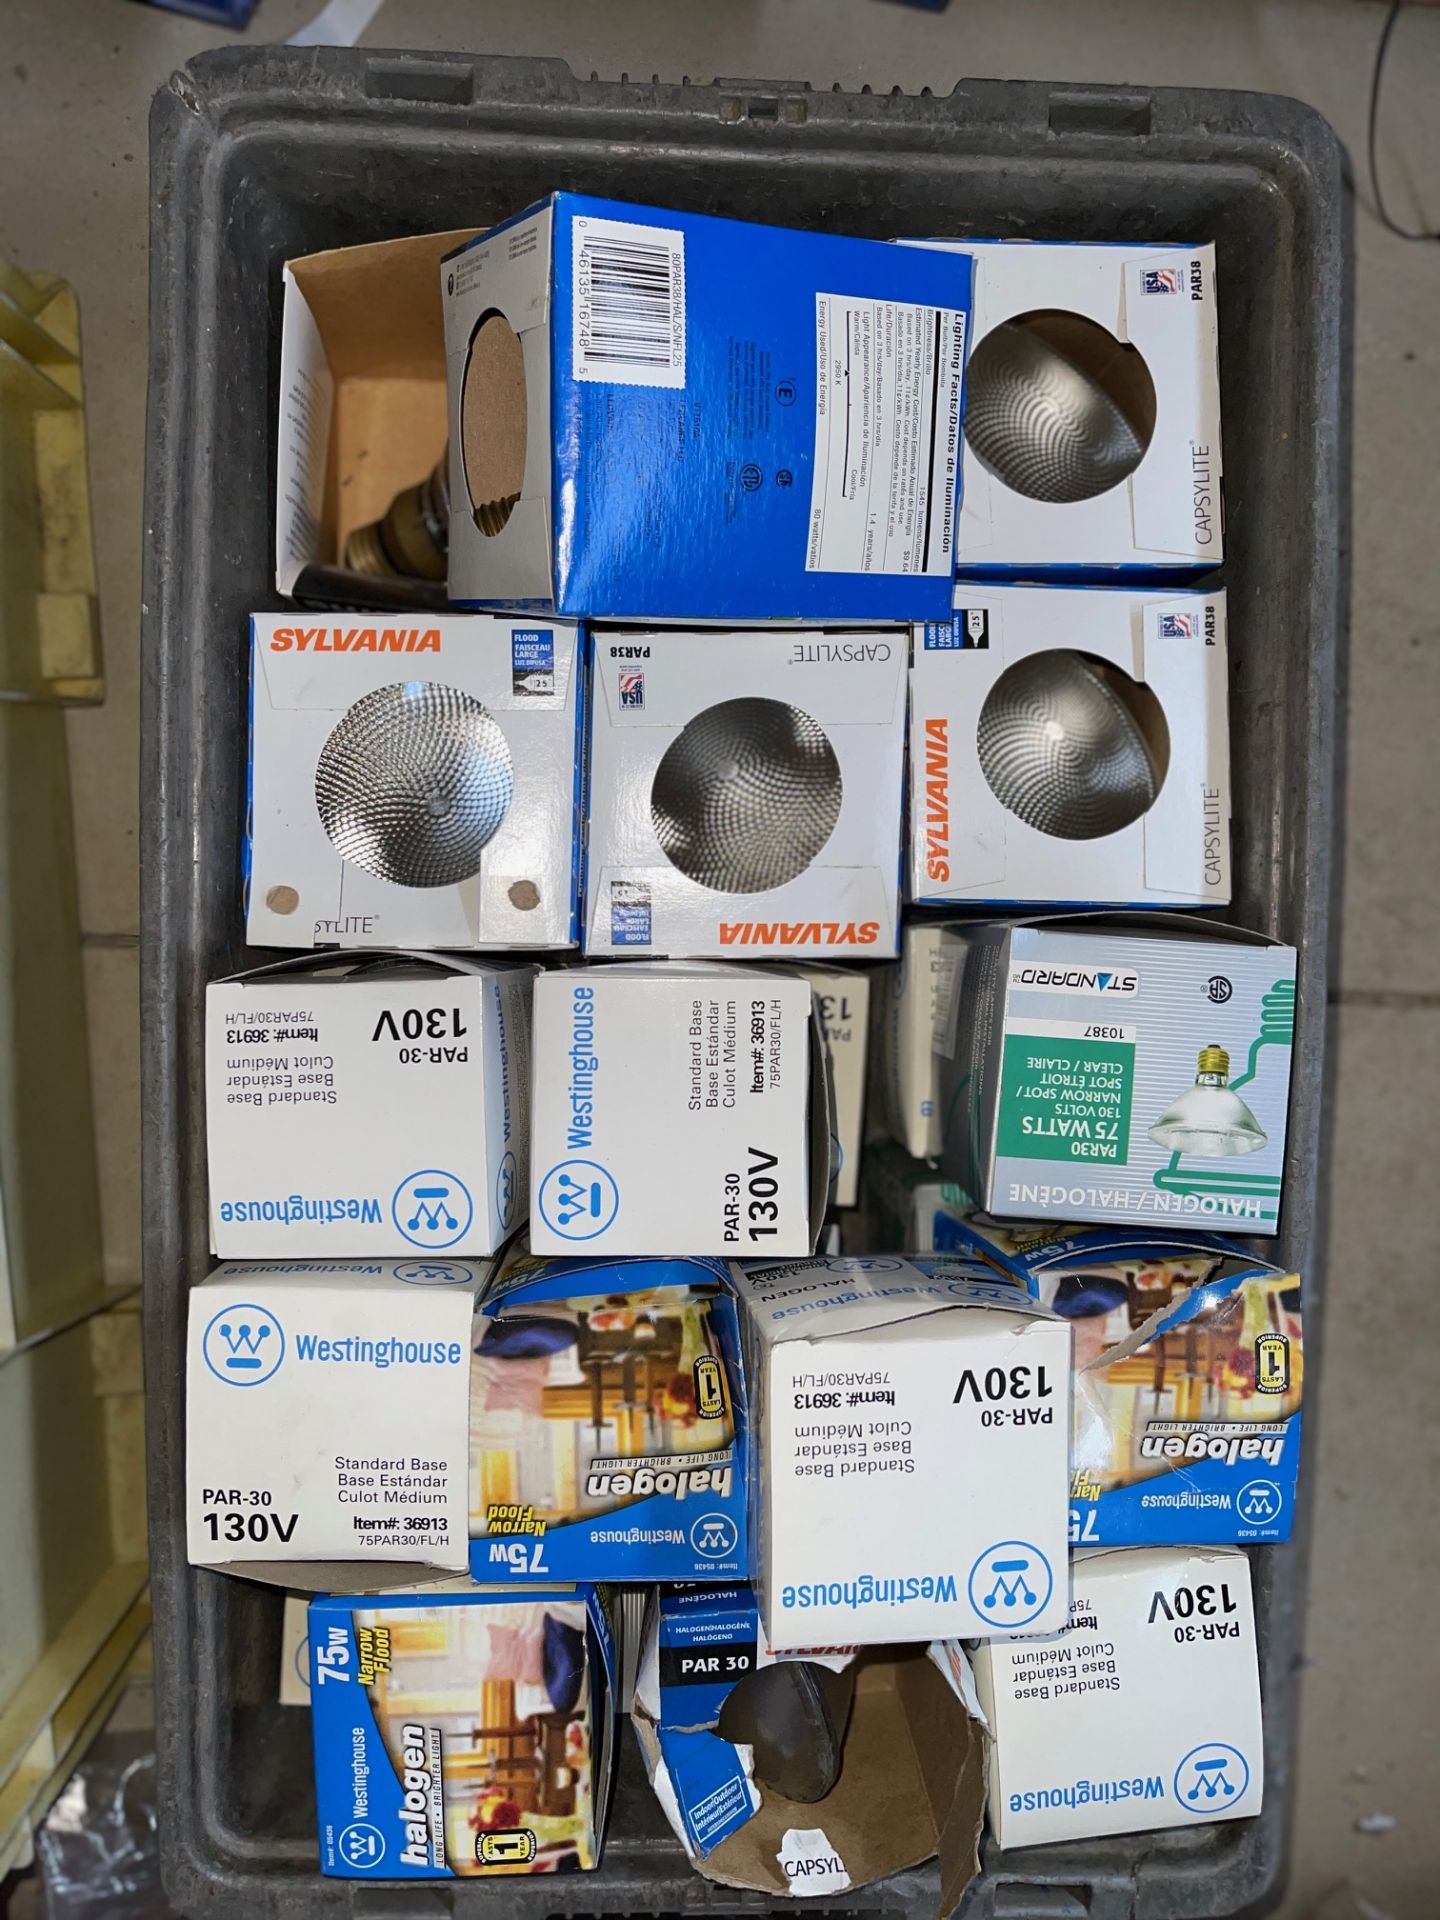 LOT OF LIGHTS, MINIATURE TO HALOGEN, SAFETY LIGHTS, AND MORE LIGHTS